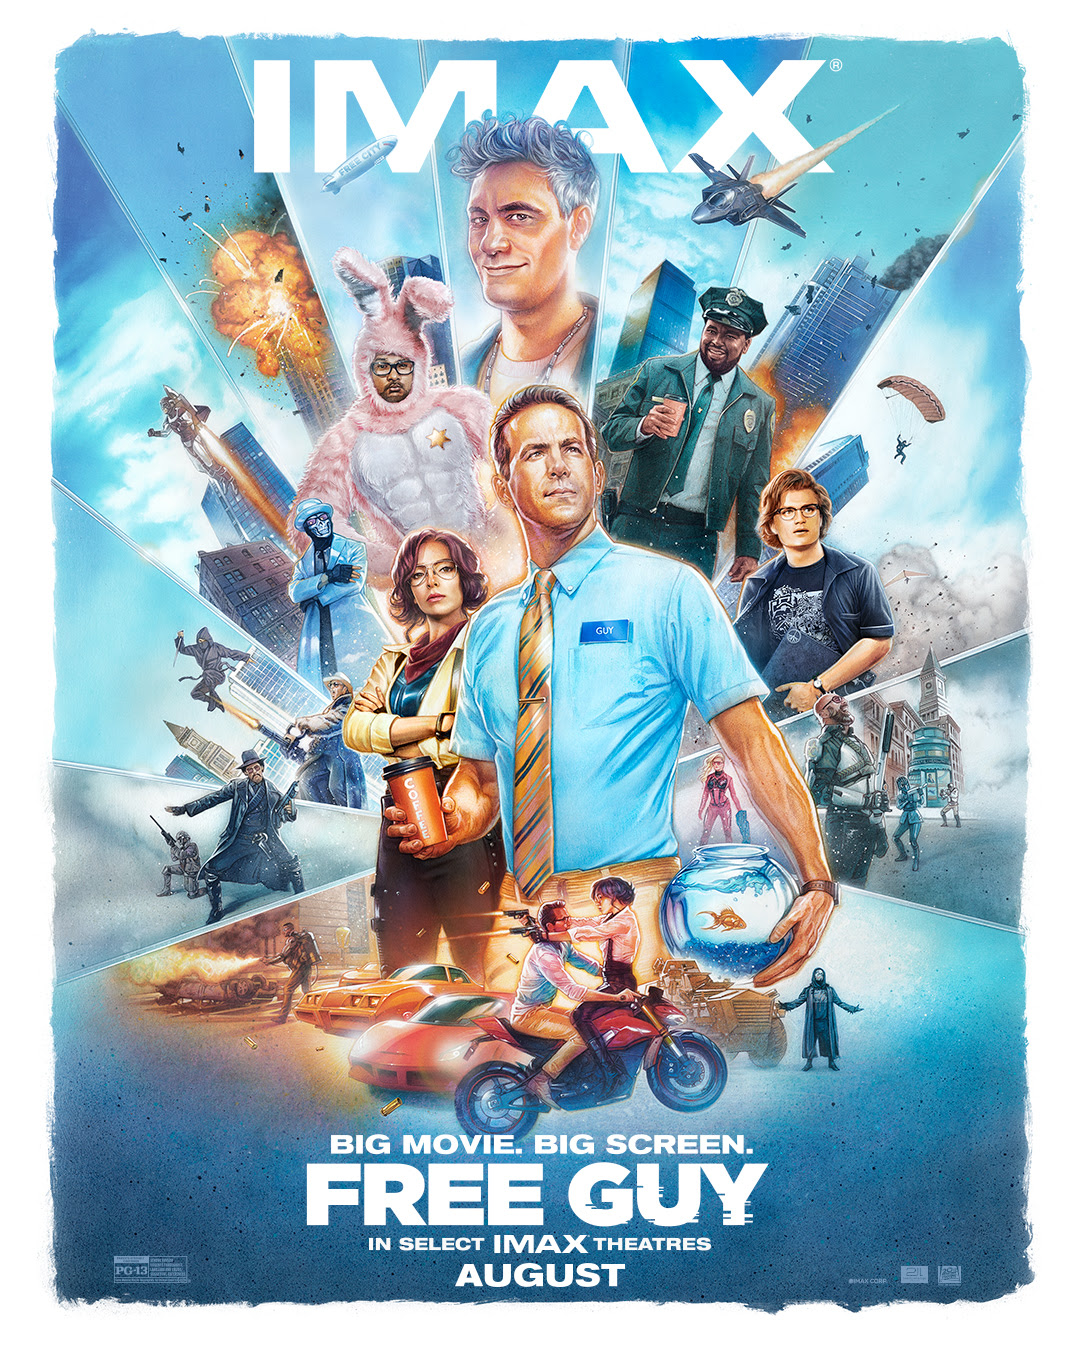 Free Guy * Hilarious with a Touching Moral